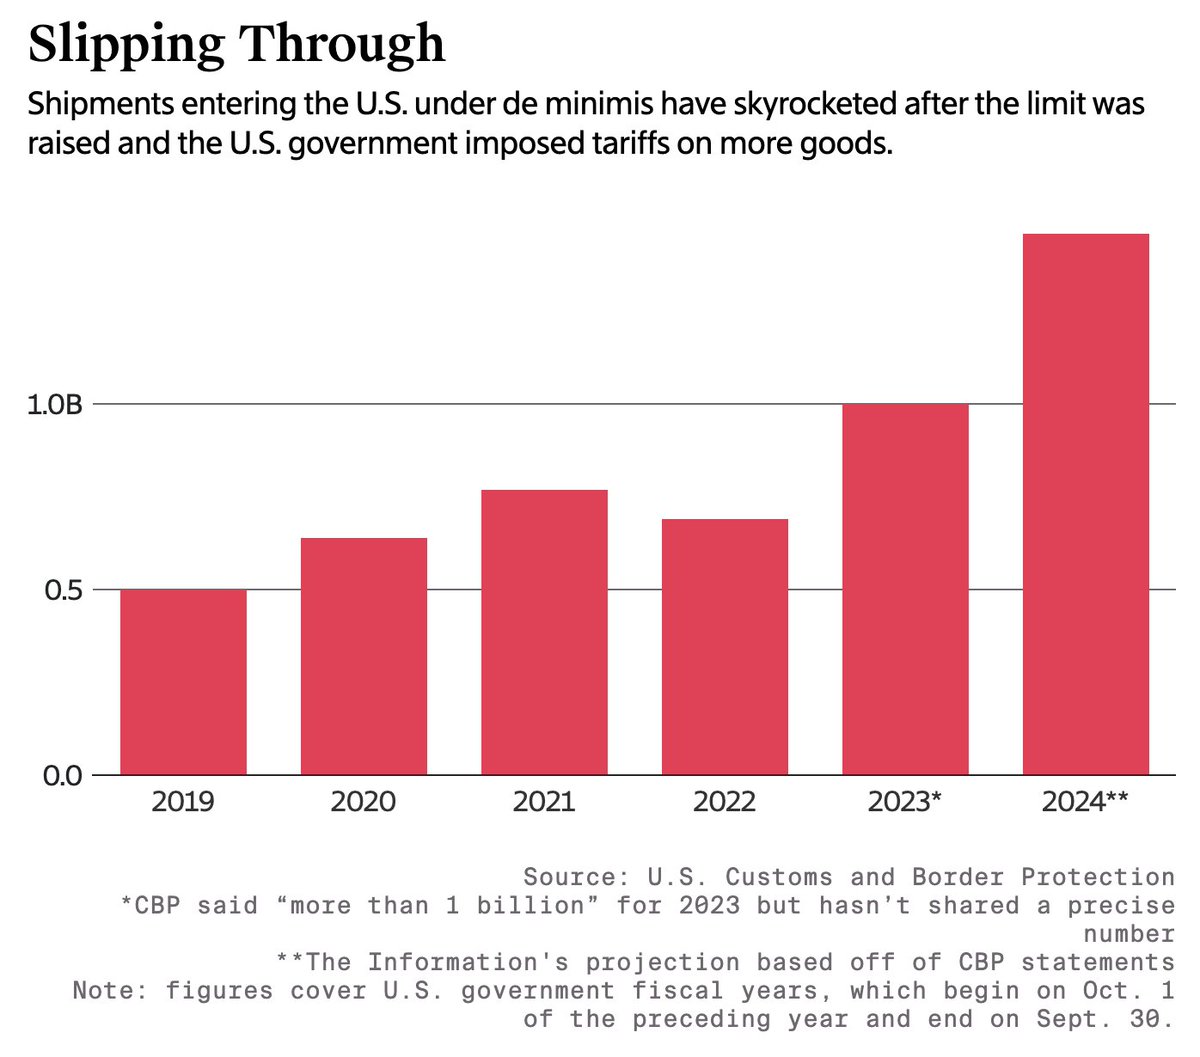 De minimis shipments are on track to hit around 1.5 billion this year, or about 4.5 packages for every American. But politicians from both parties have been discussing ways to tighten or close the loophole. Read the full story from me and @anngehan: theinformation.com/articles/how-u…